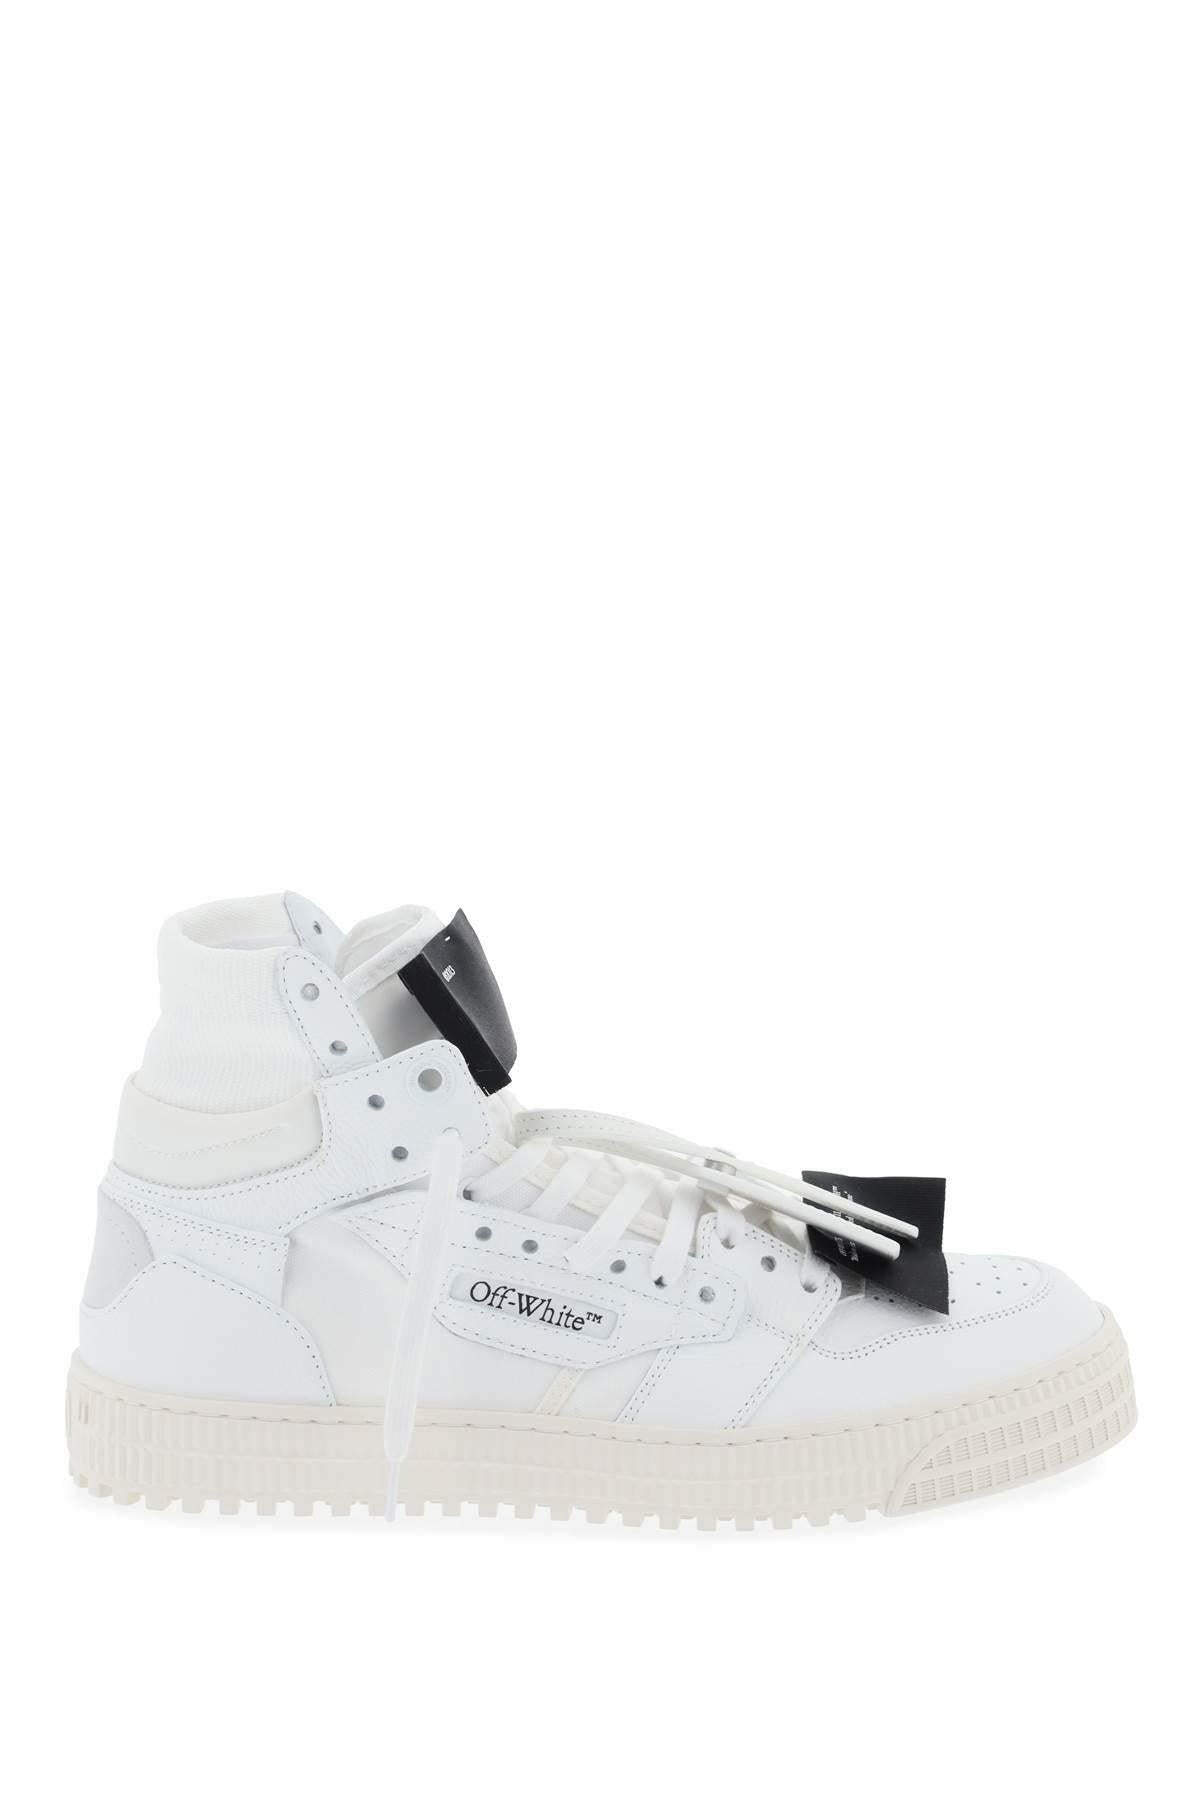 White and Black '3.0 Off Court' Leather High-Top Sneakers OFF-WHITE JOHN JULIA.